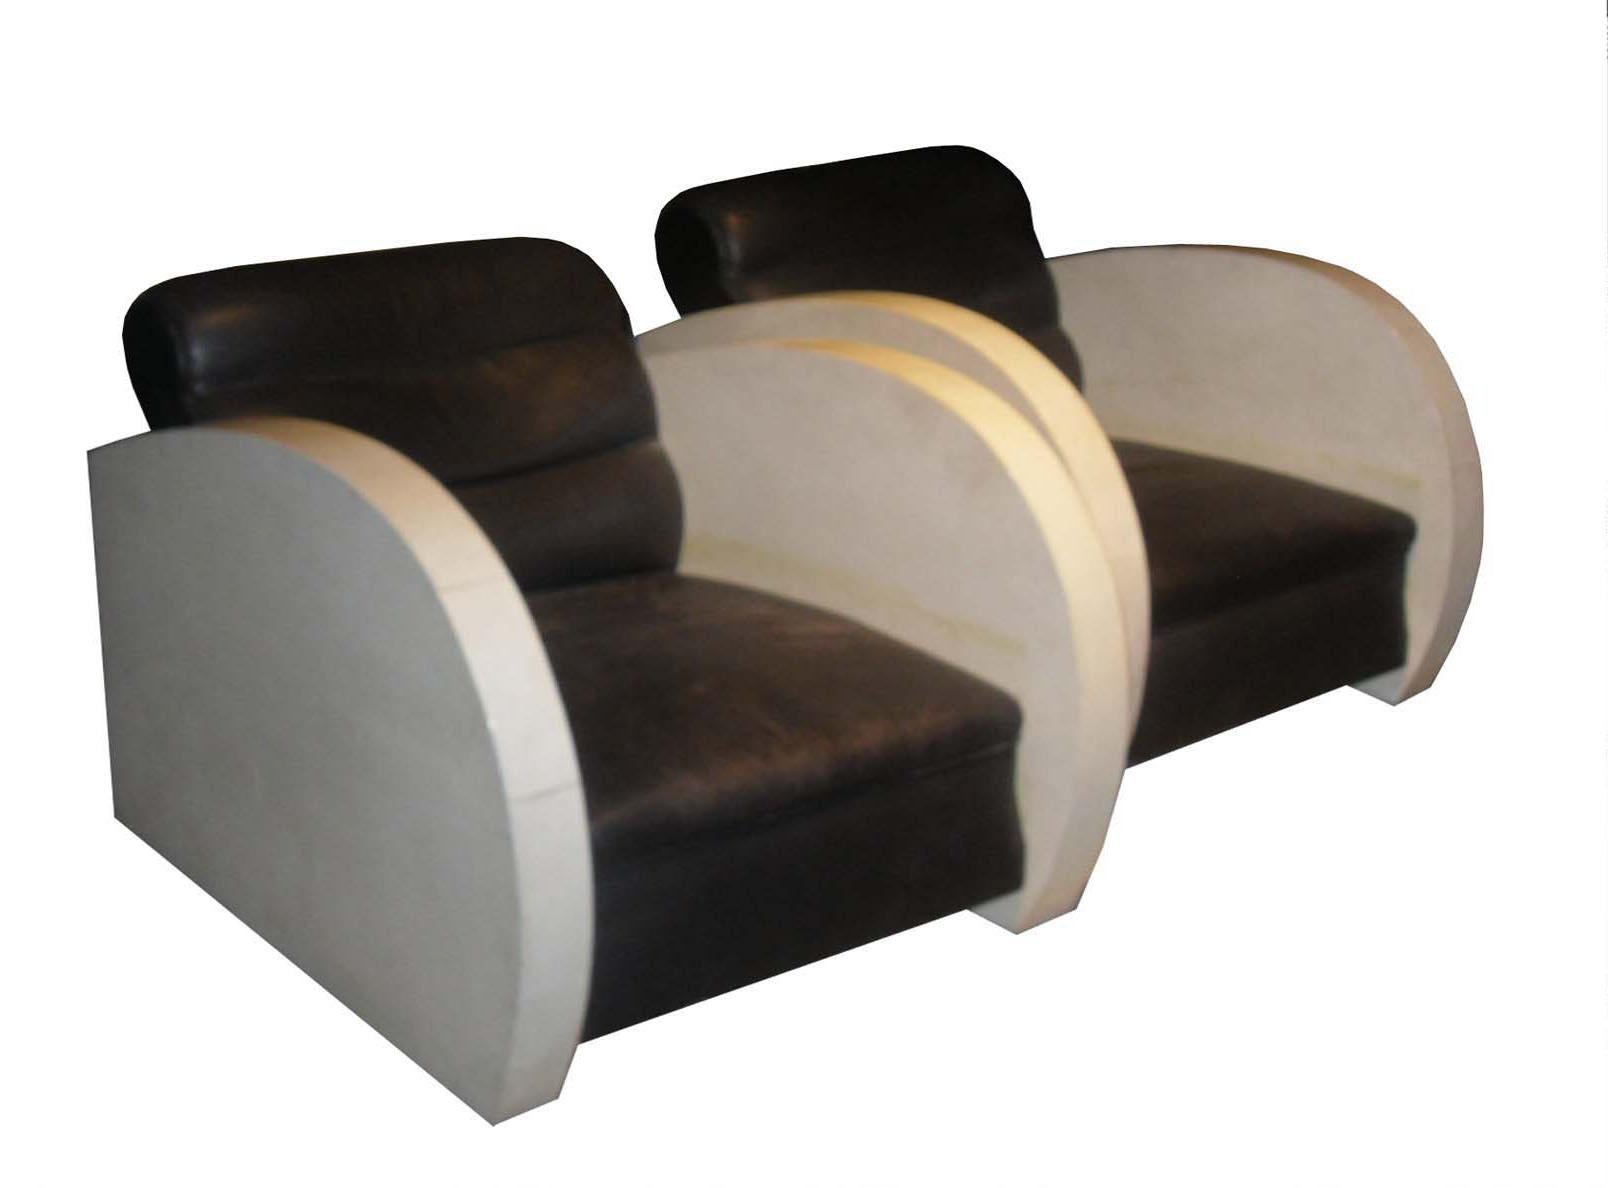 Pair of Art Deco Club Chairs in Parchment and Black Leather In Good Condition For Sale In Pompano Beach, FL